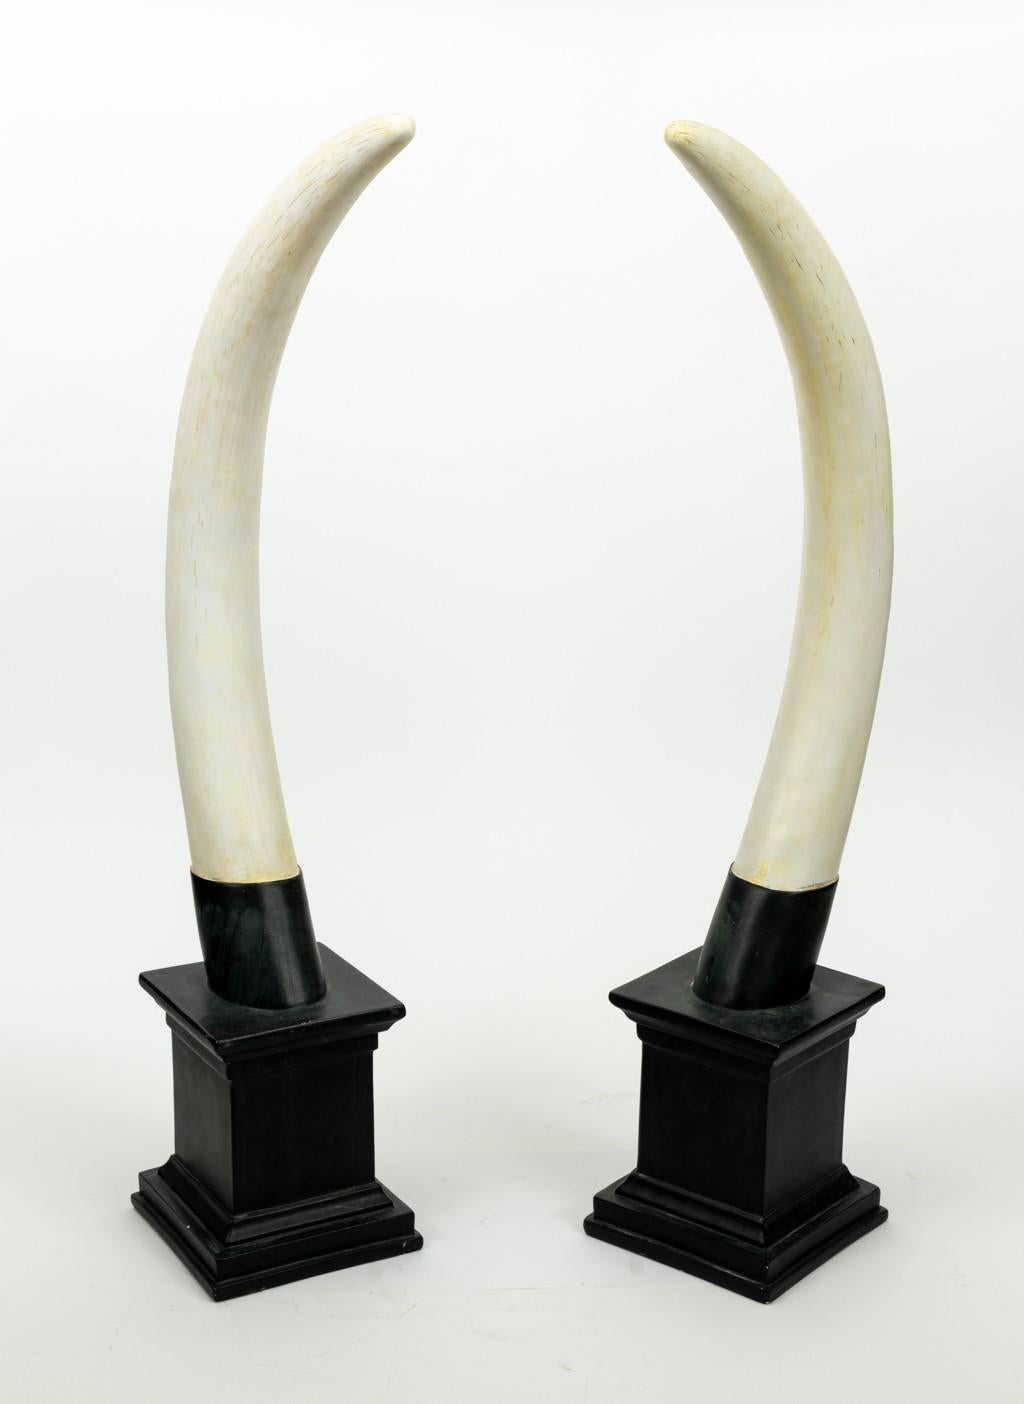 Pair of composition horns on stands. Please note of wear consistent with age.